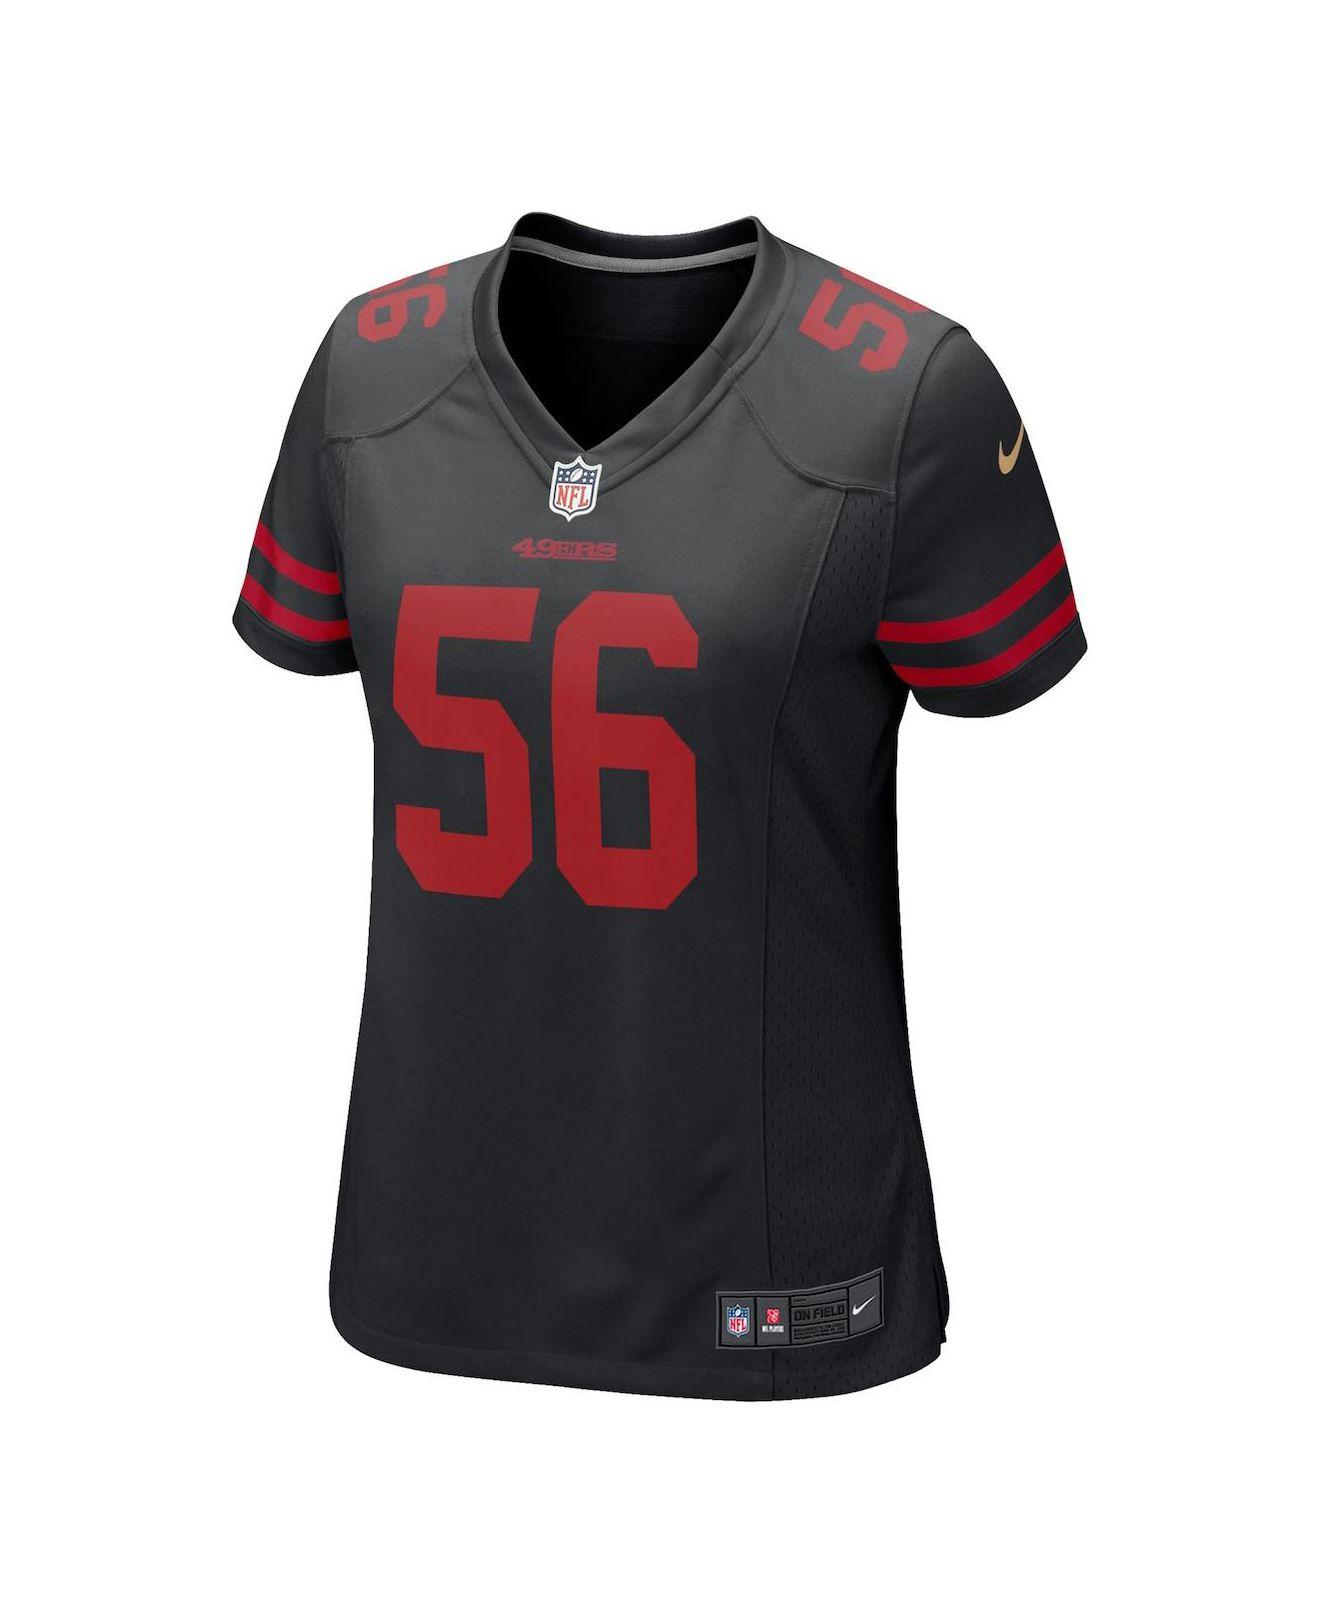 The best selling] Personalized NFL San Francisco 49ers Alternate